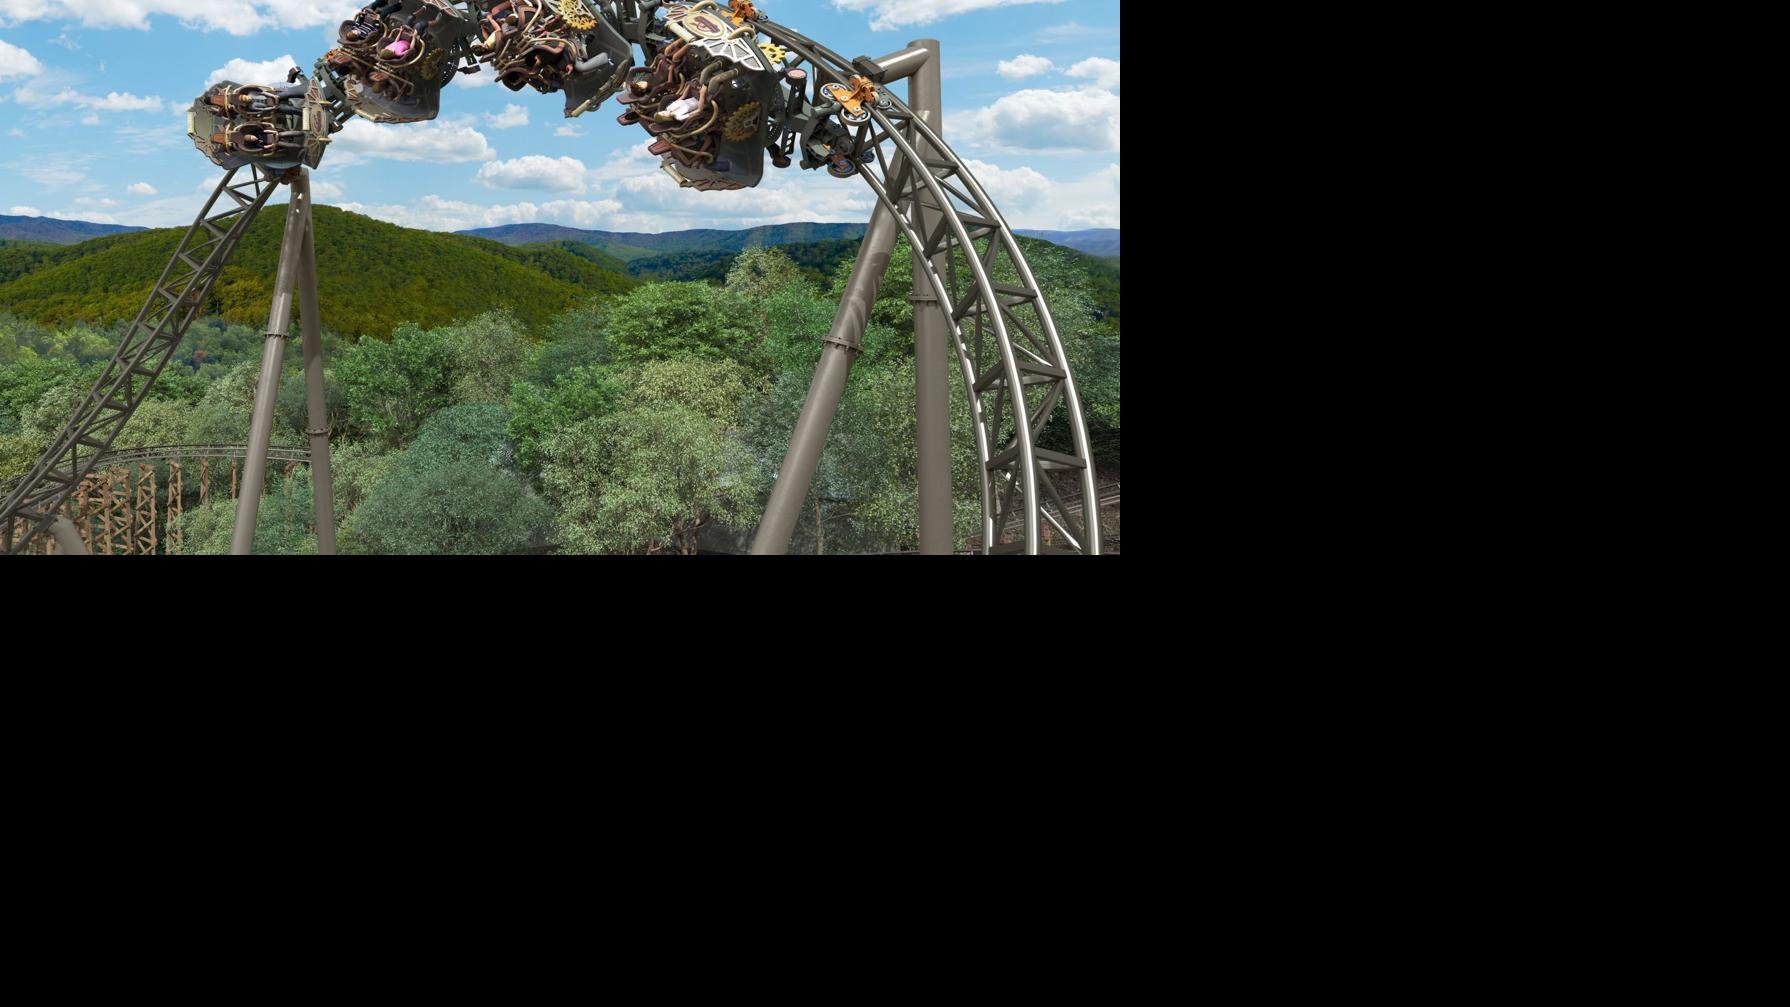 Silver Dollar City announces 'fastest, steepest, tallest' spinning